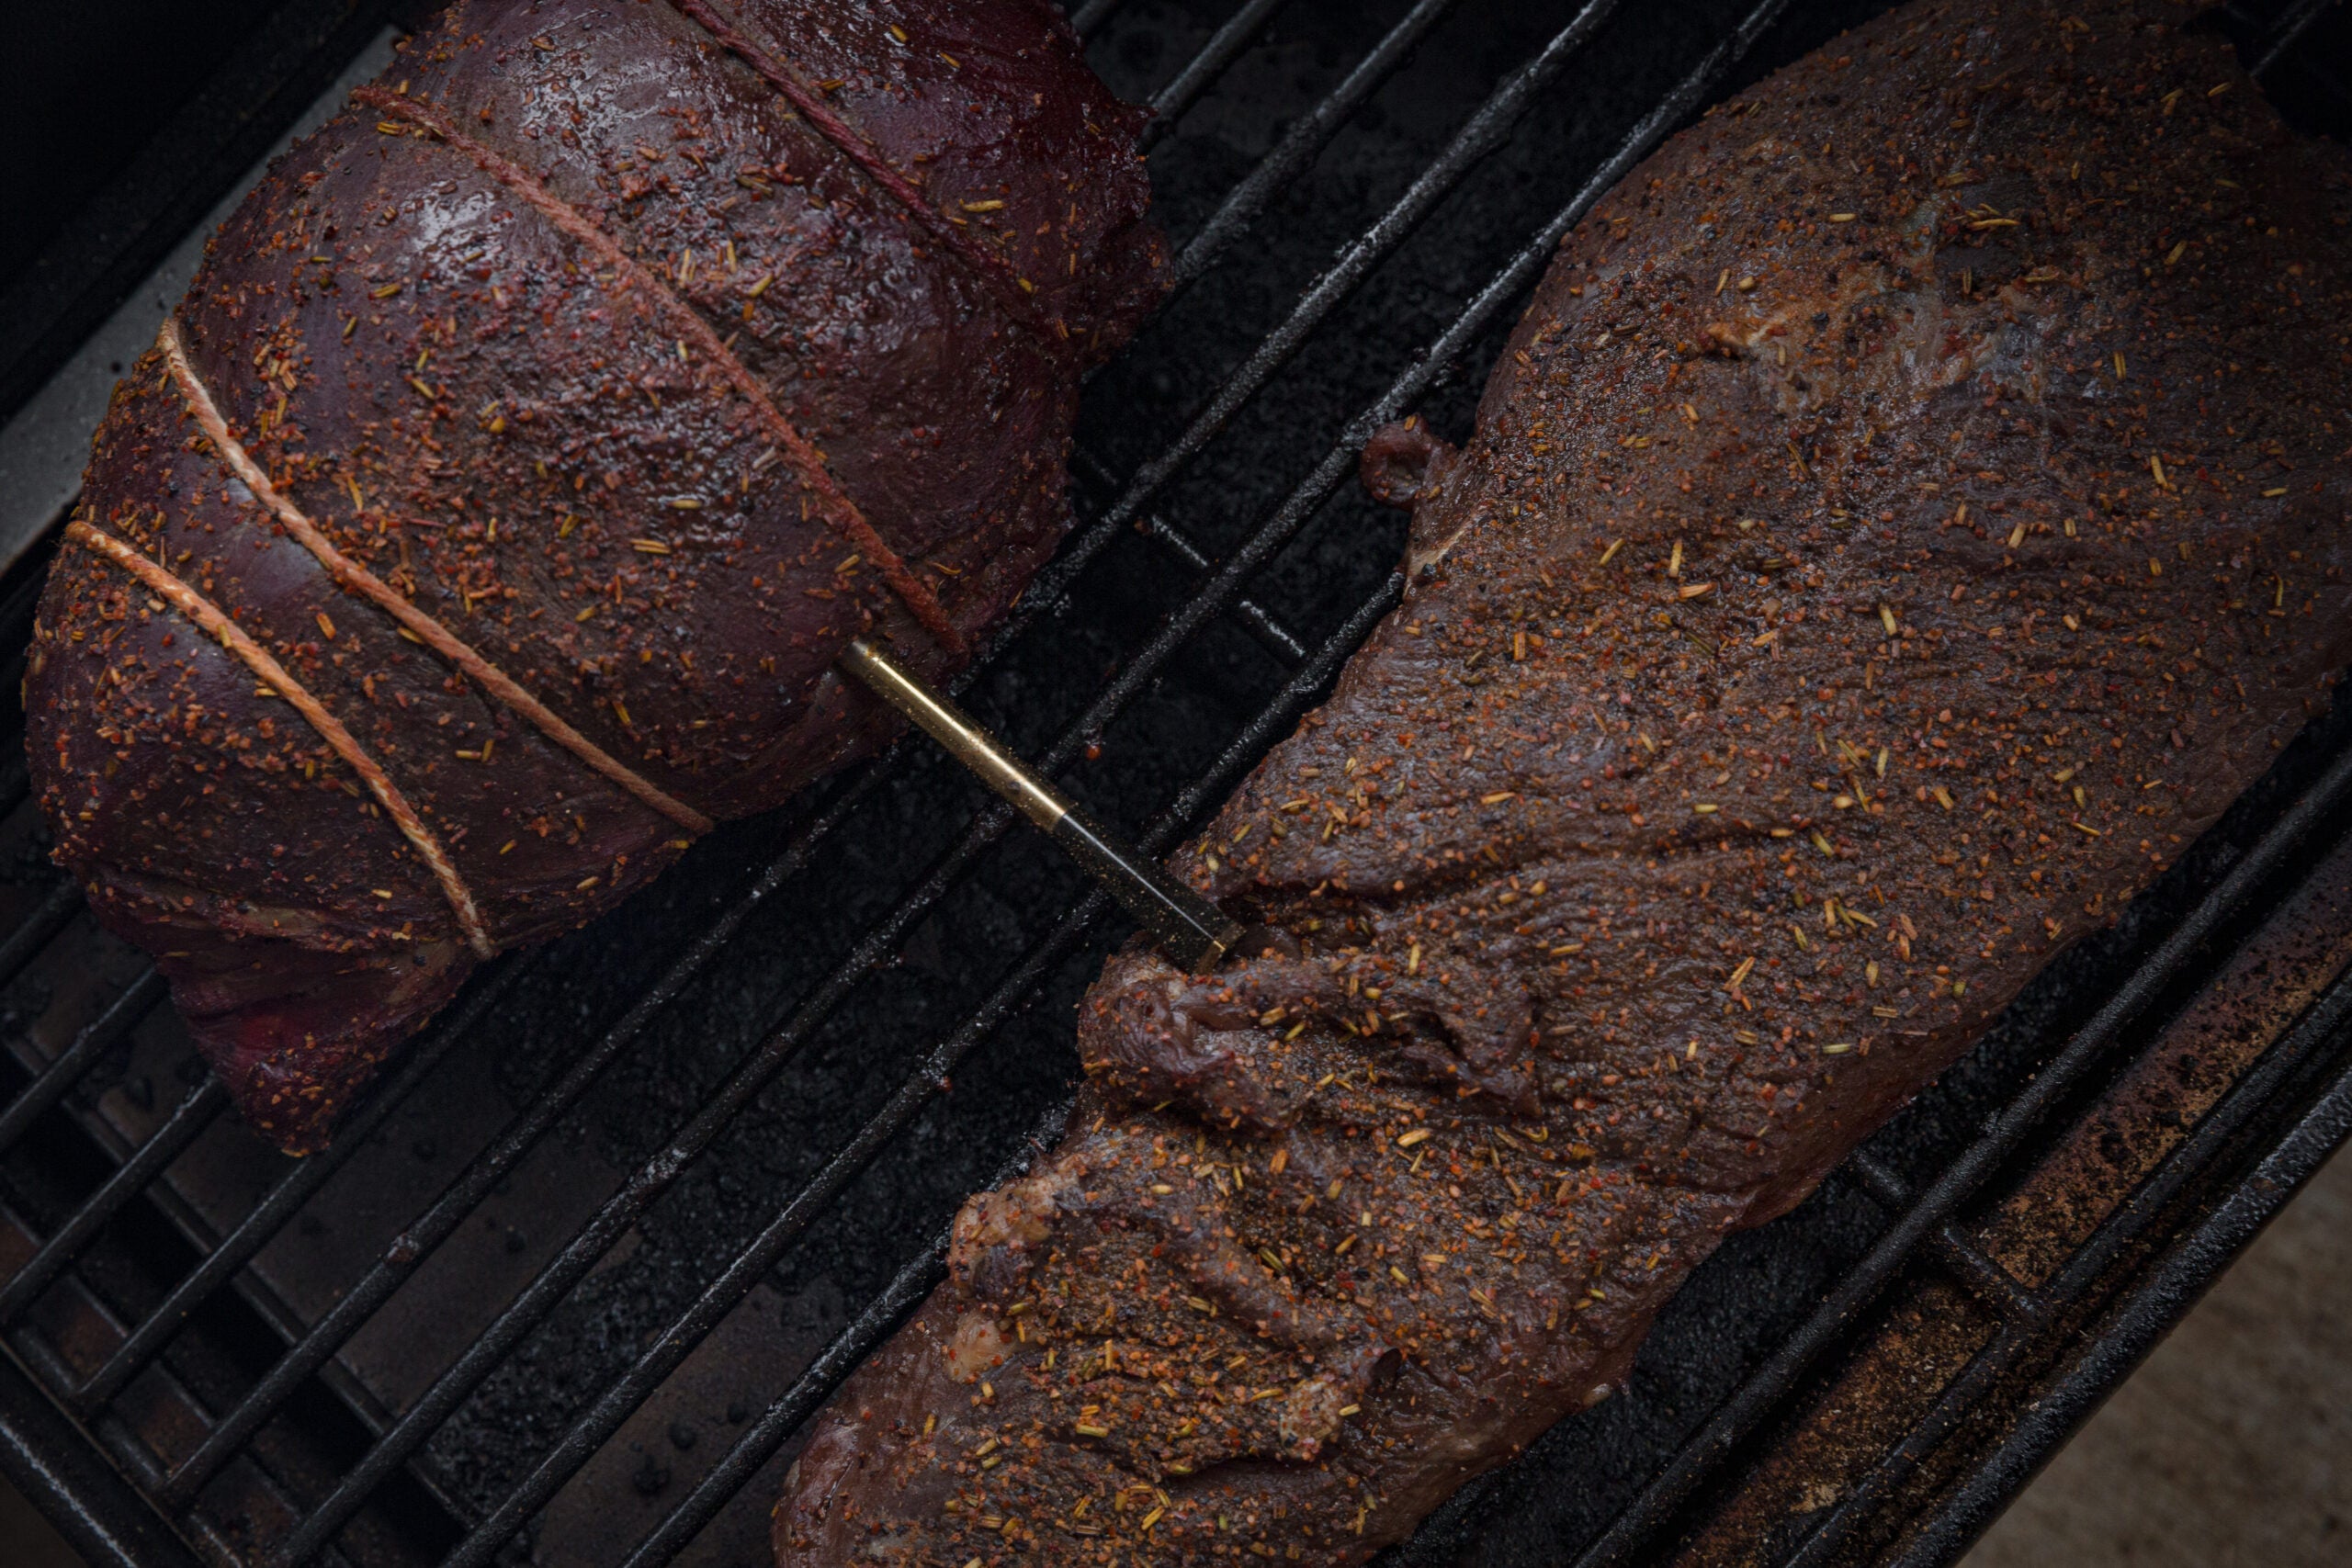 Two whitetail deer venison roasts cooking on a grill.